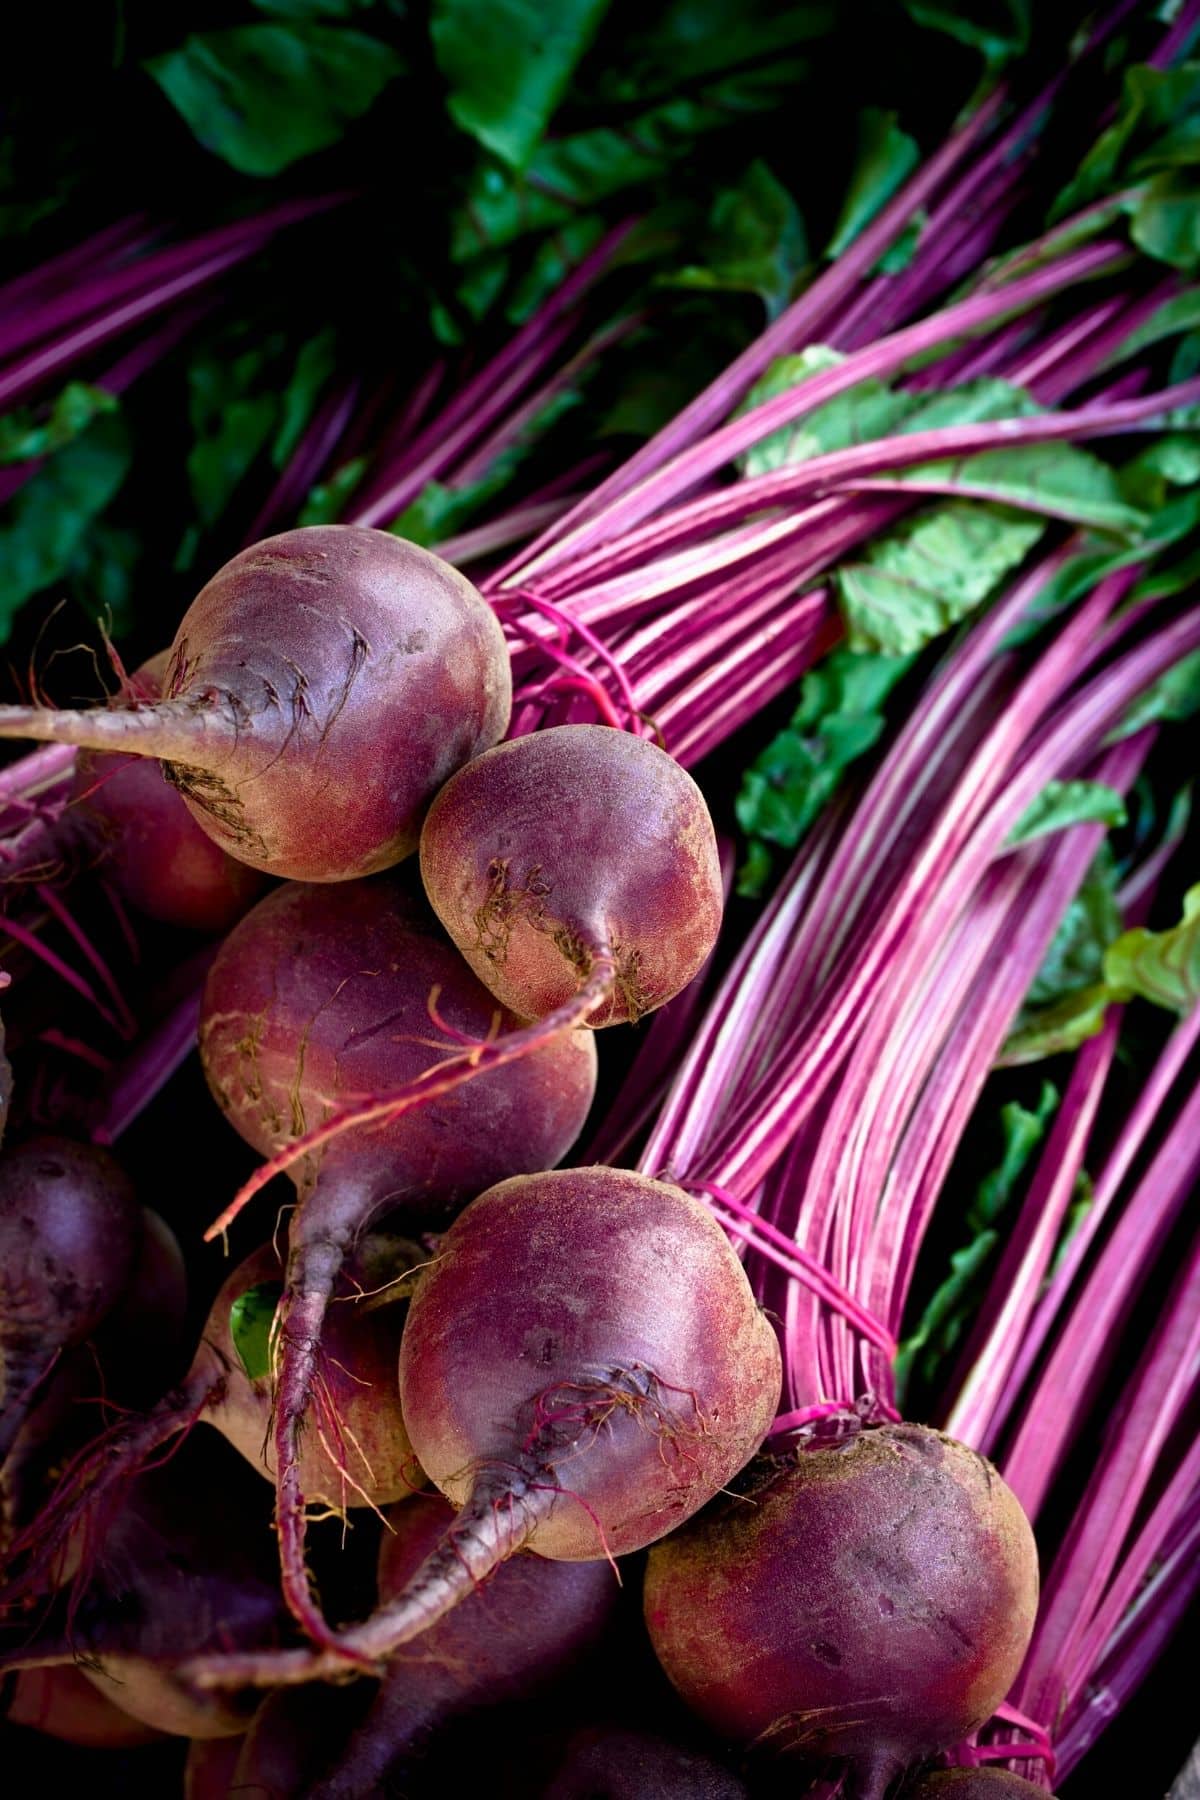 a bunch of raw beets